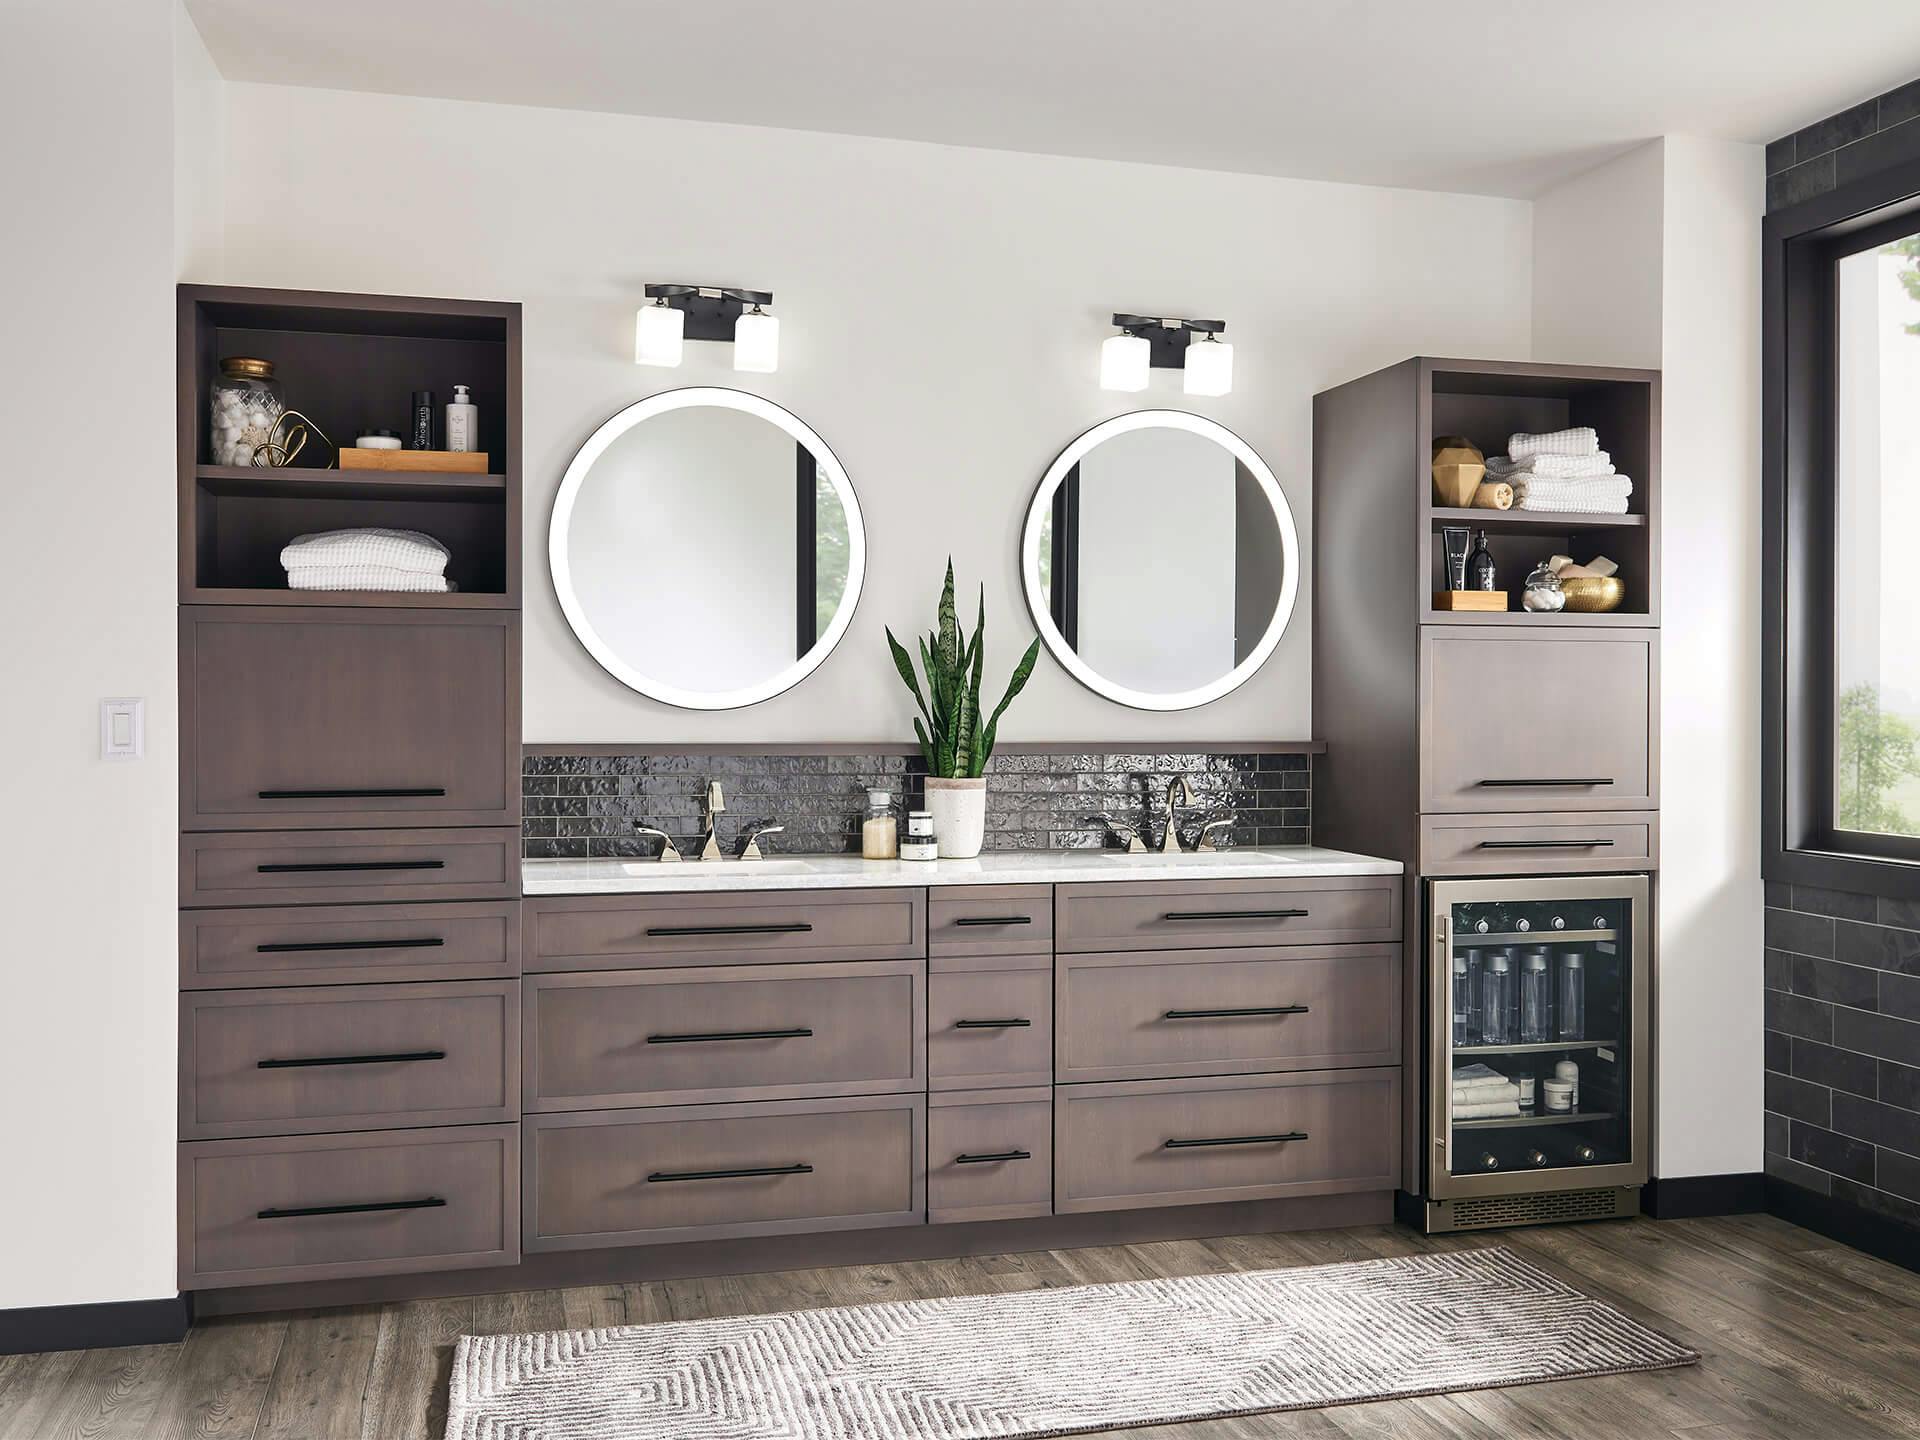 Jack and Jill style bathroom with two Ryame mirrors lit above with Marette vanity lights in the daytime